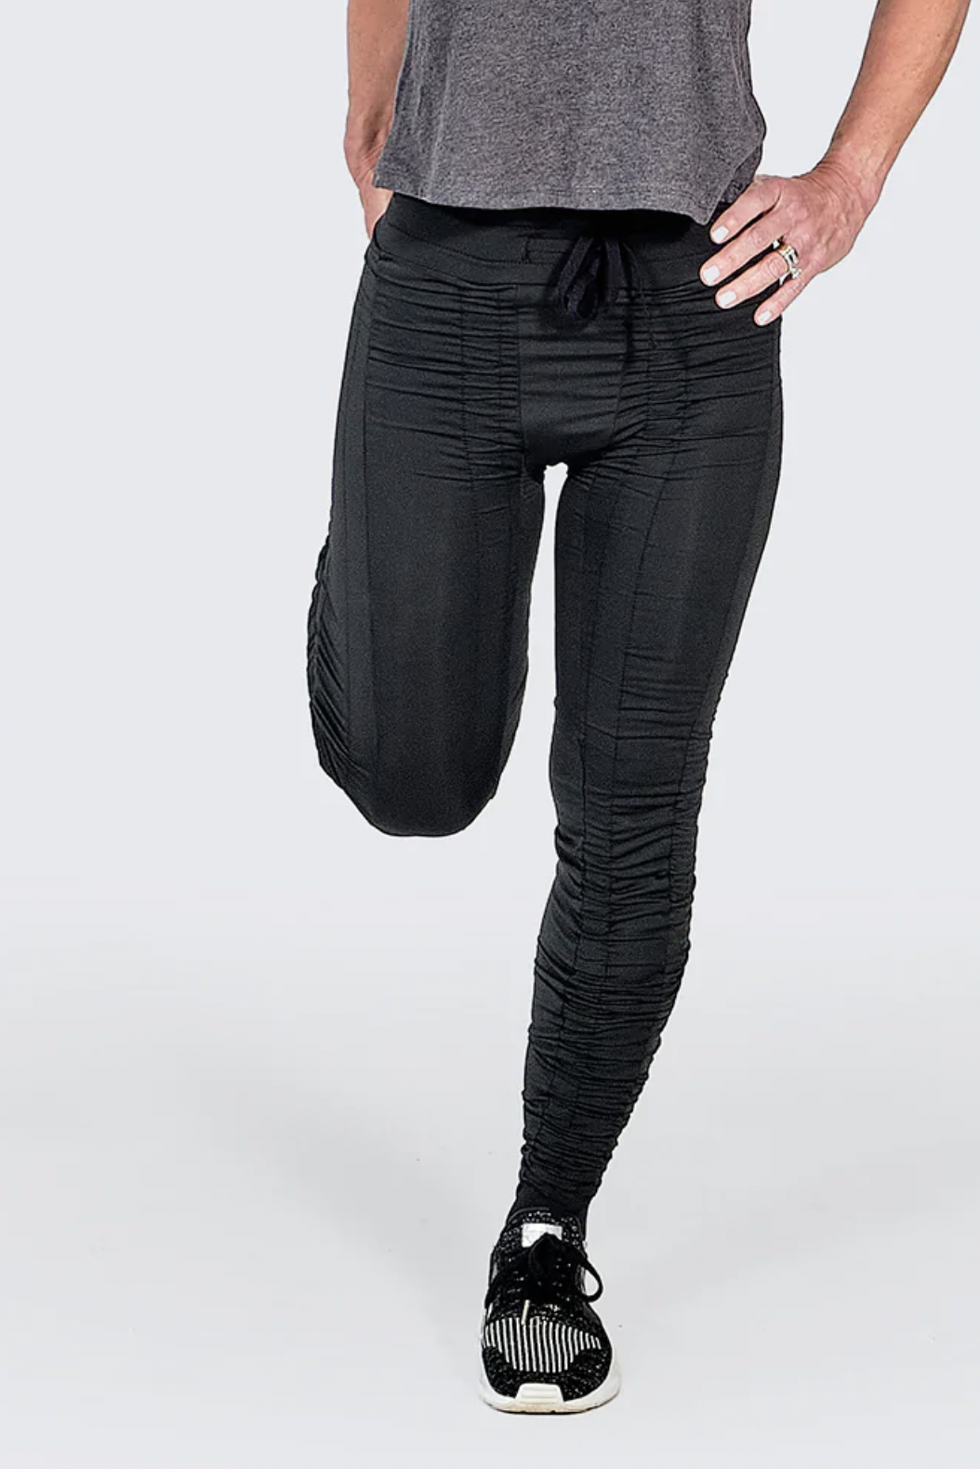 Tracy Anderson Makes Groin-Displaying Leggings Now